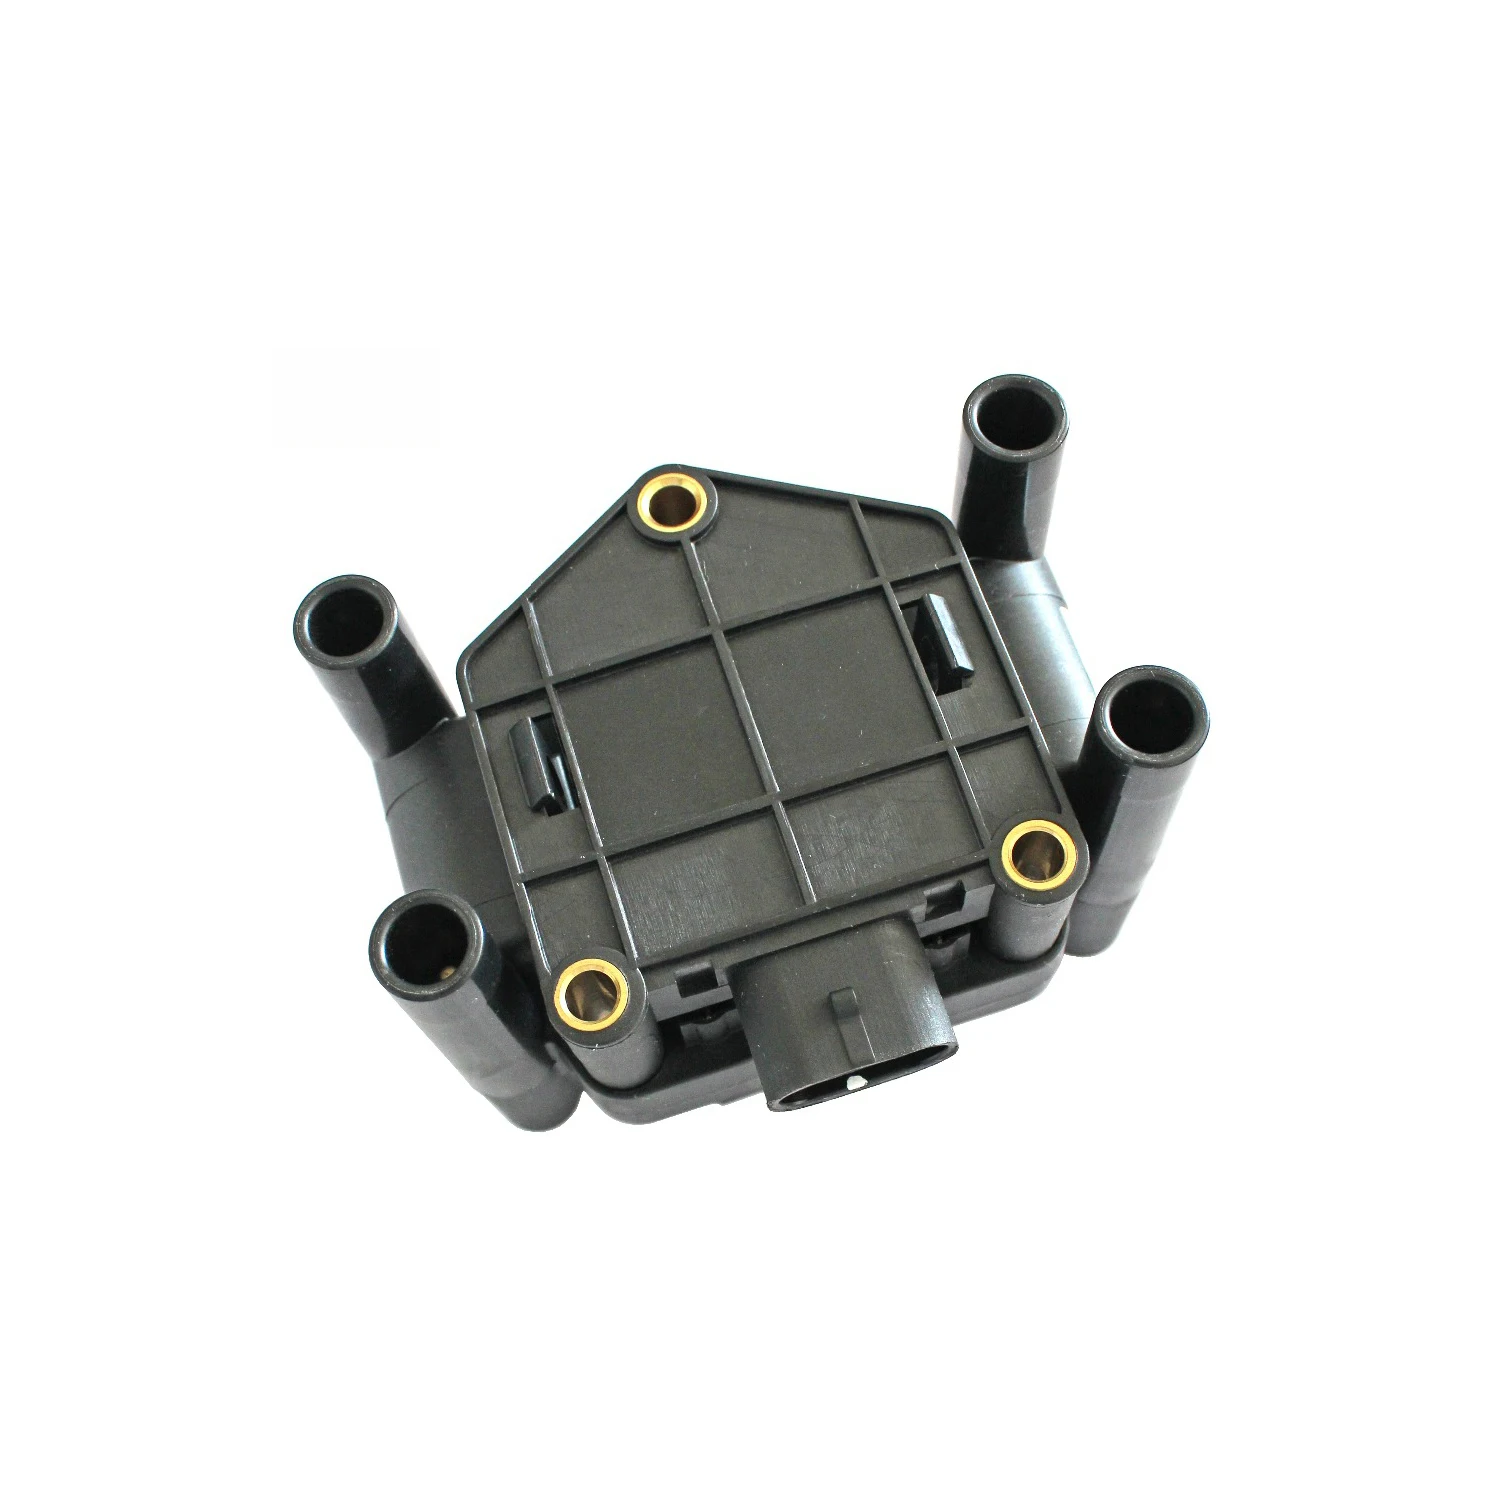 

A11-3705110DA Kathaina Auto Parts 1 pcs Ignition Coil For More Marelli, Chery, China Motor Wholesale Price Car Accessories